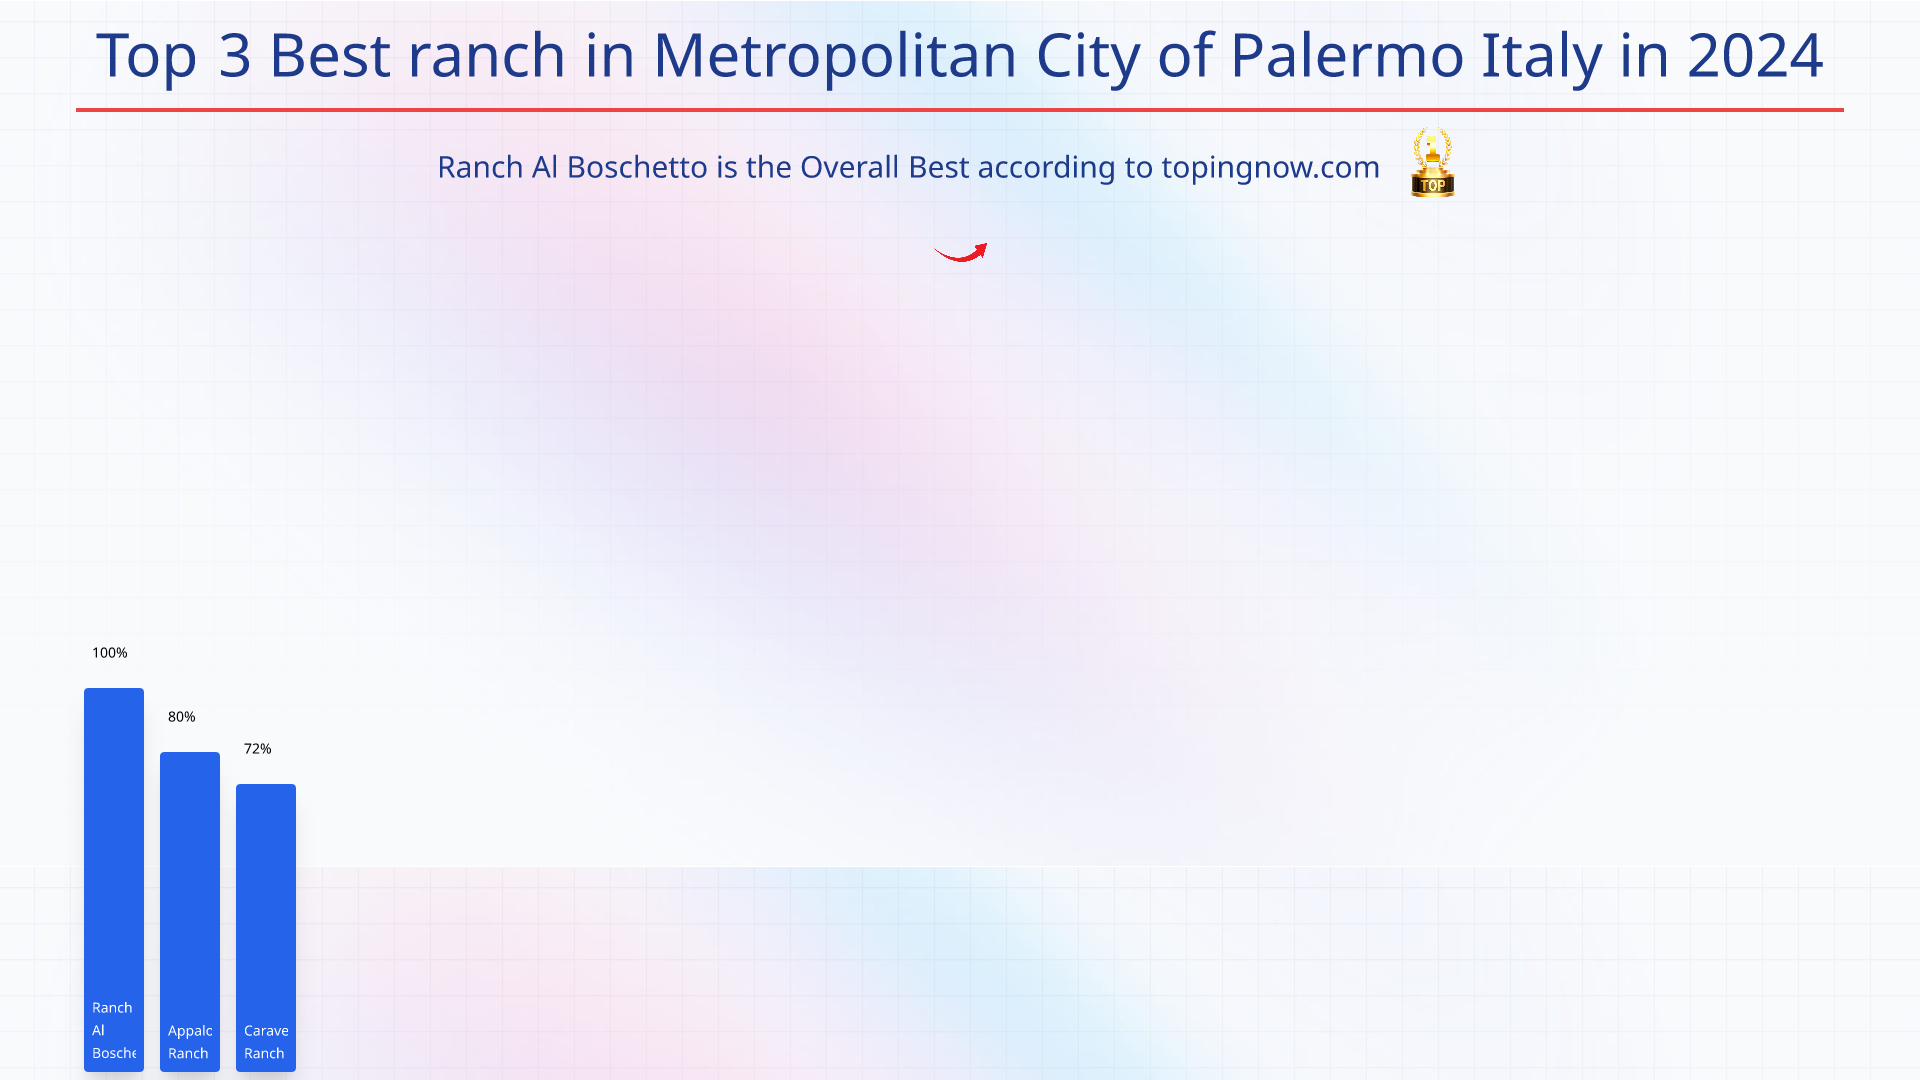 Top 3 Best ranch in Metropolitan City of Palermo Italy in 2024: Top 3 Best ranch in Metropolitan City of Palermo Italy in 2024